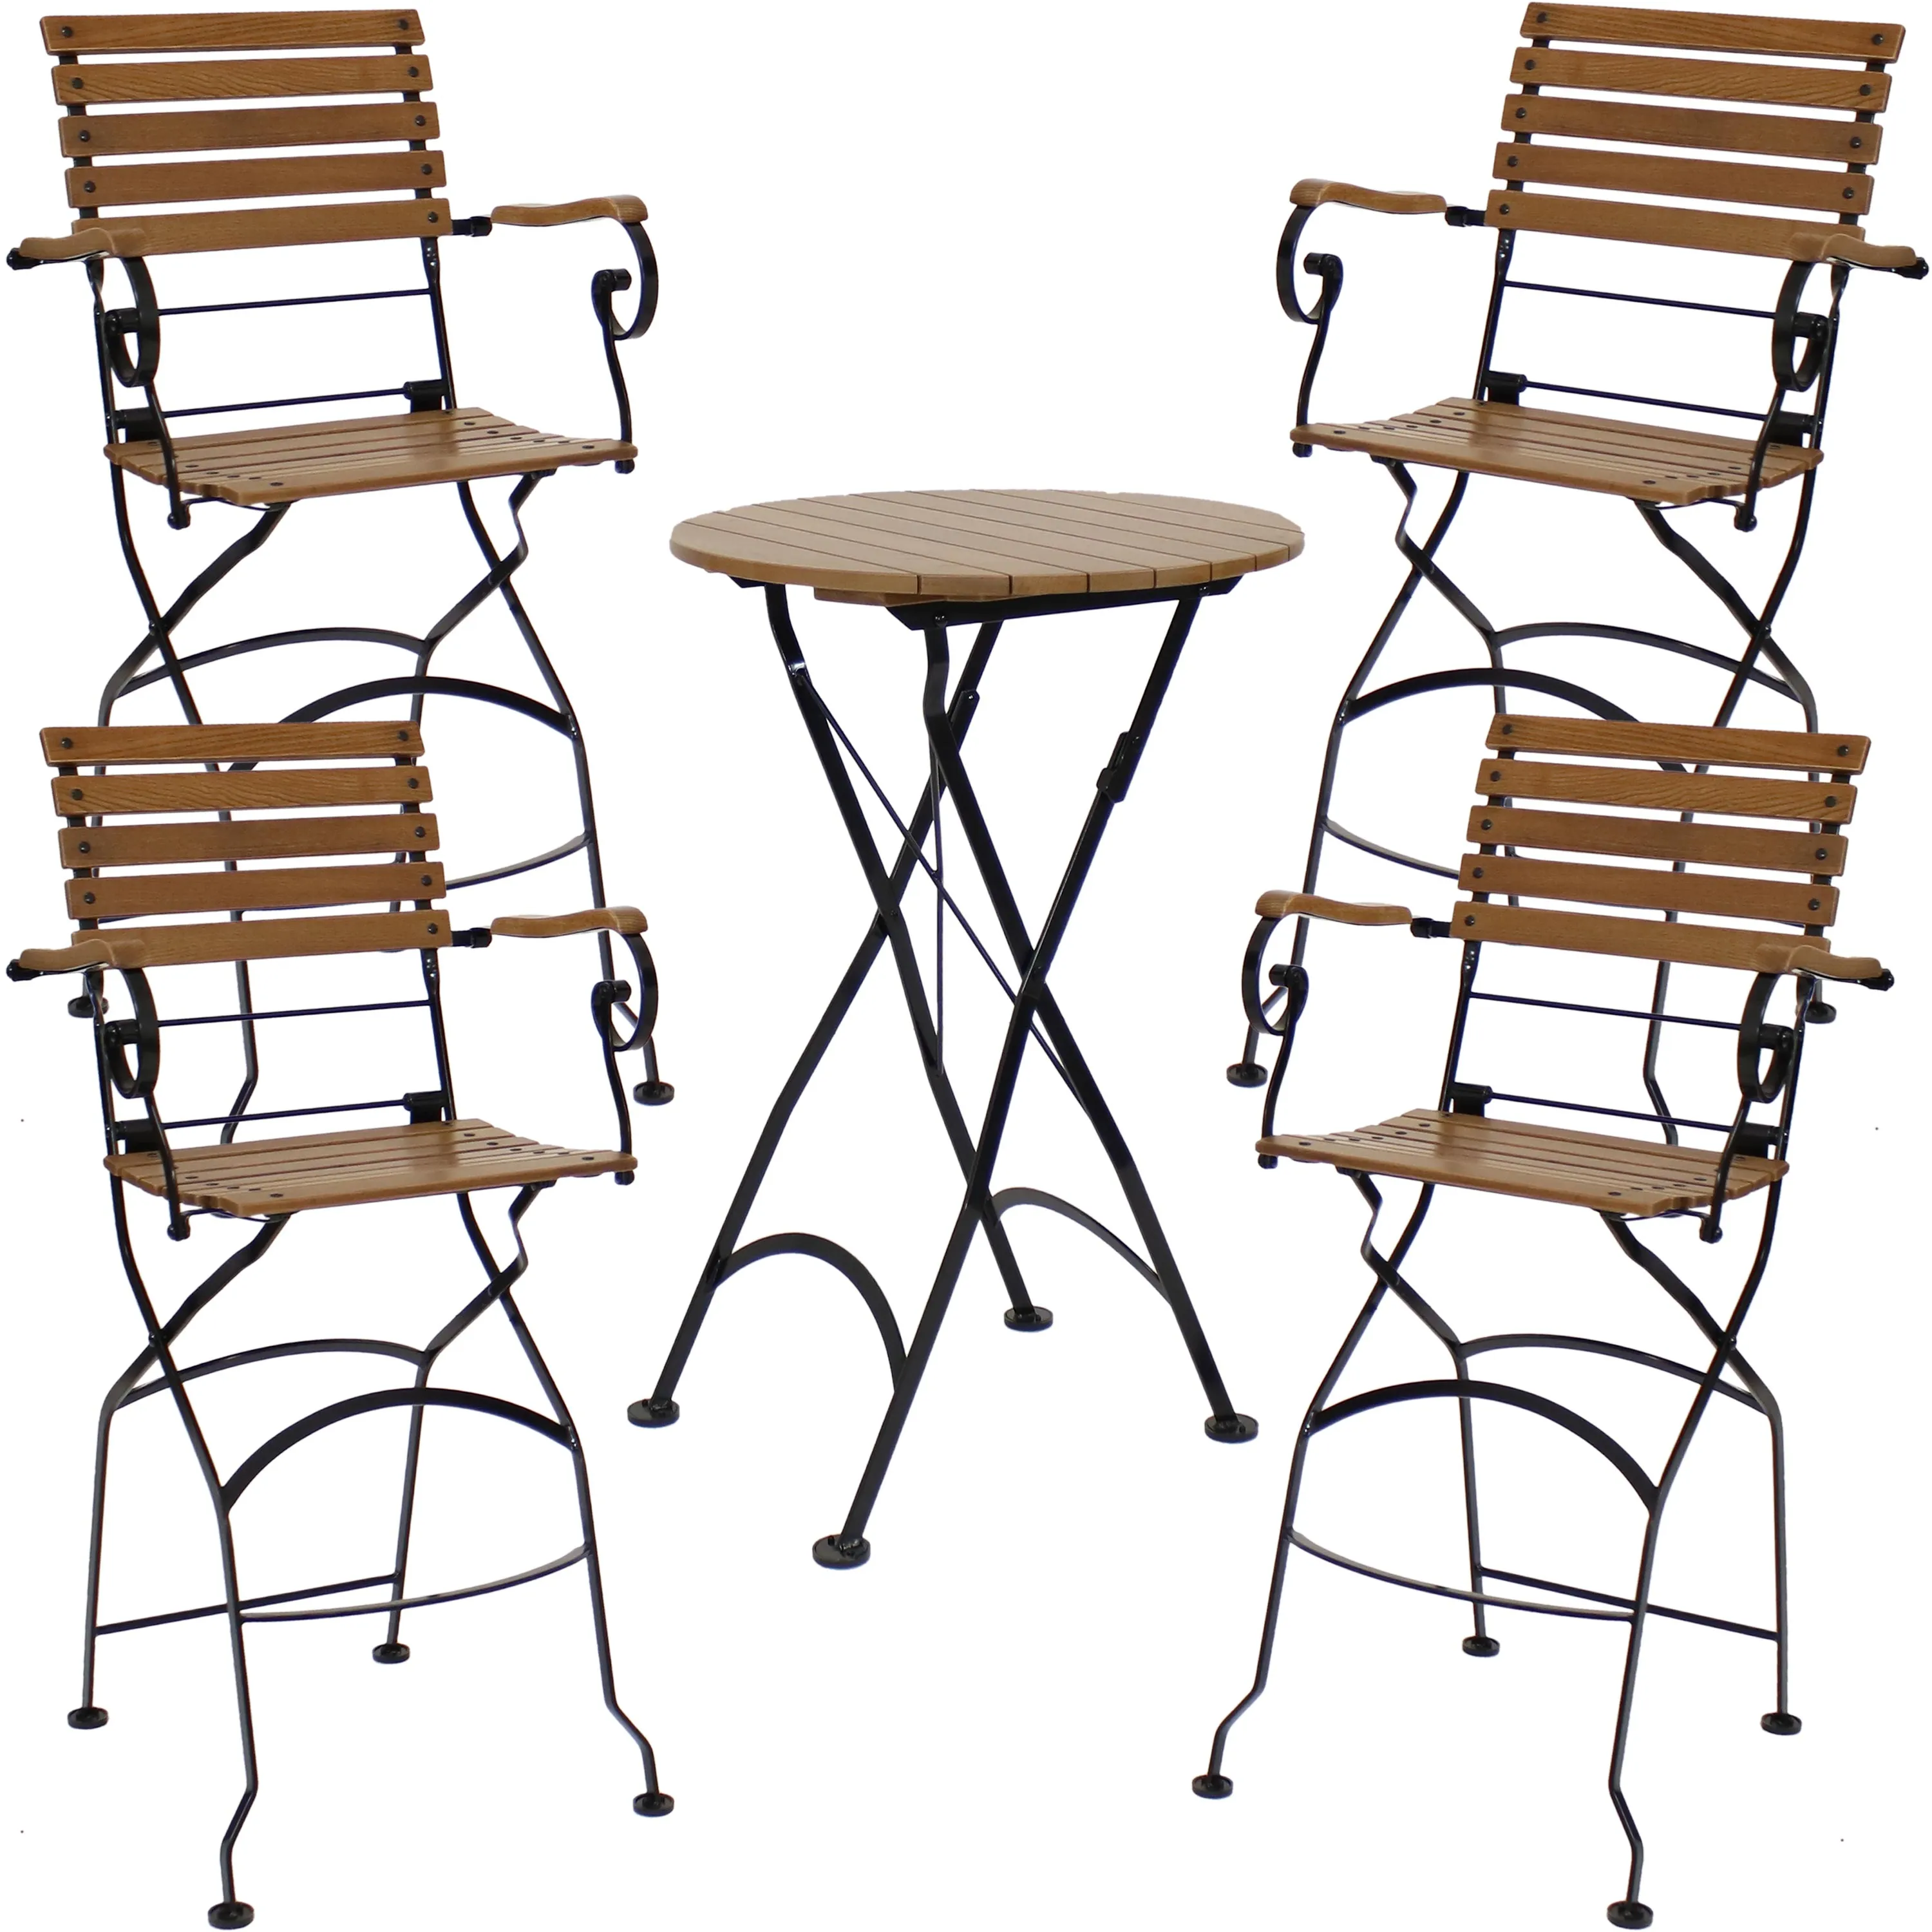 Sunnydaze Deluxe Chestnut 5-Piece Folding Patio Bar-Height Table and Chairs